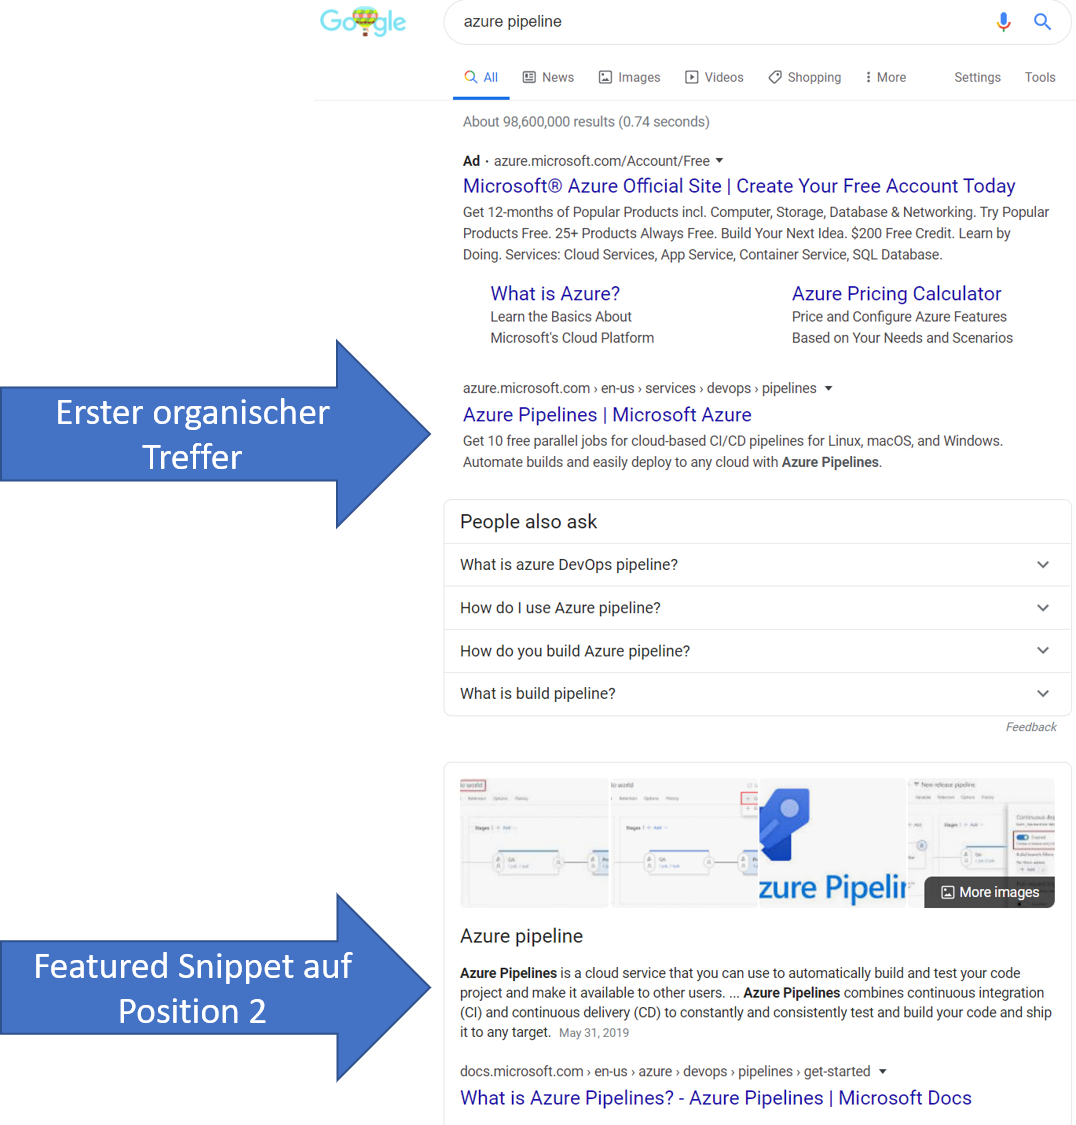 Google: Featured Snippet auf Position 2